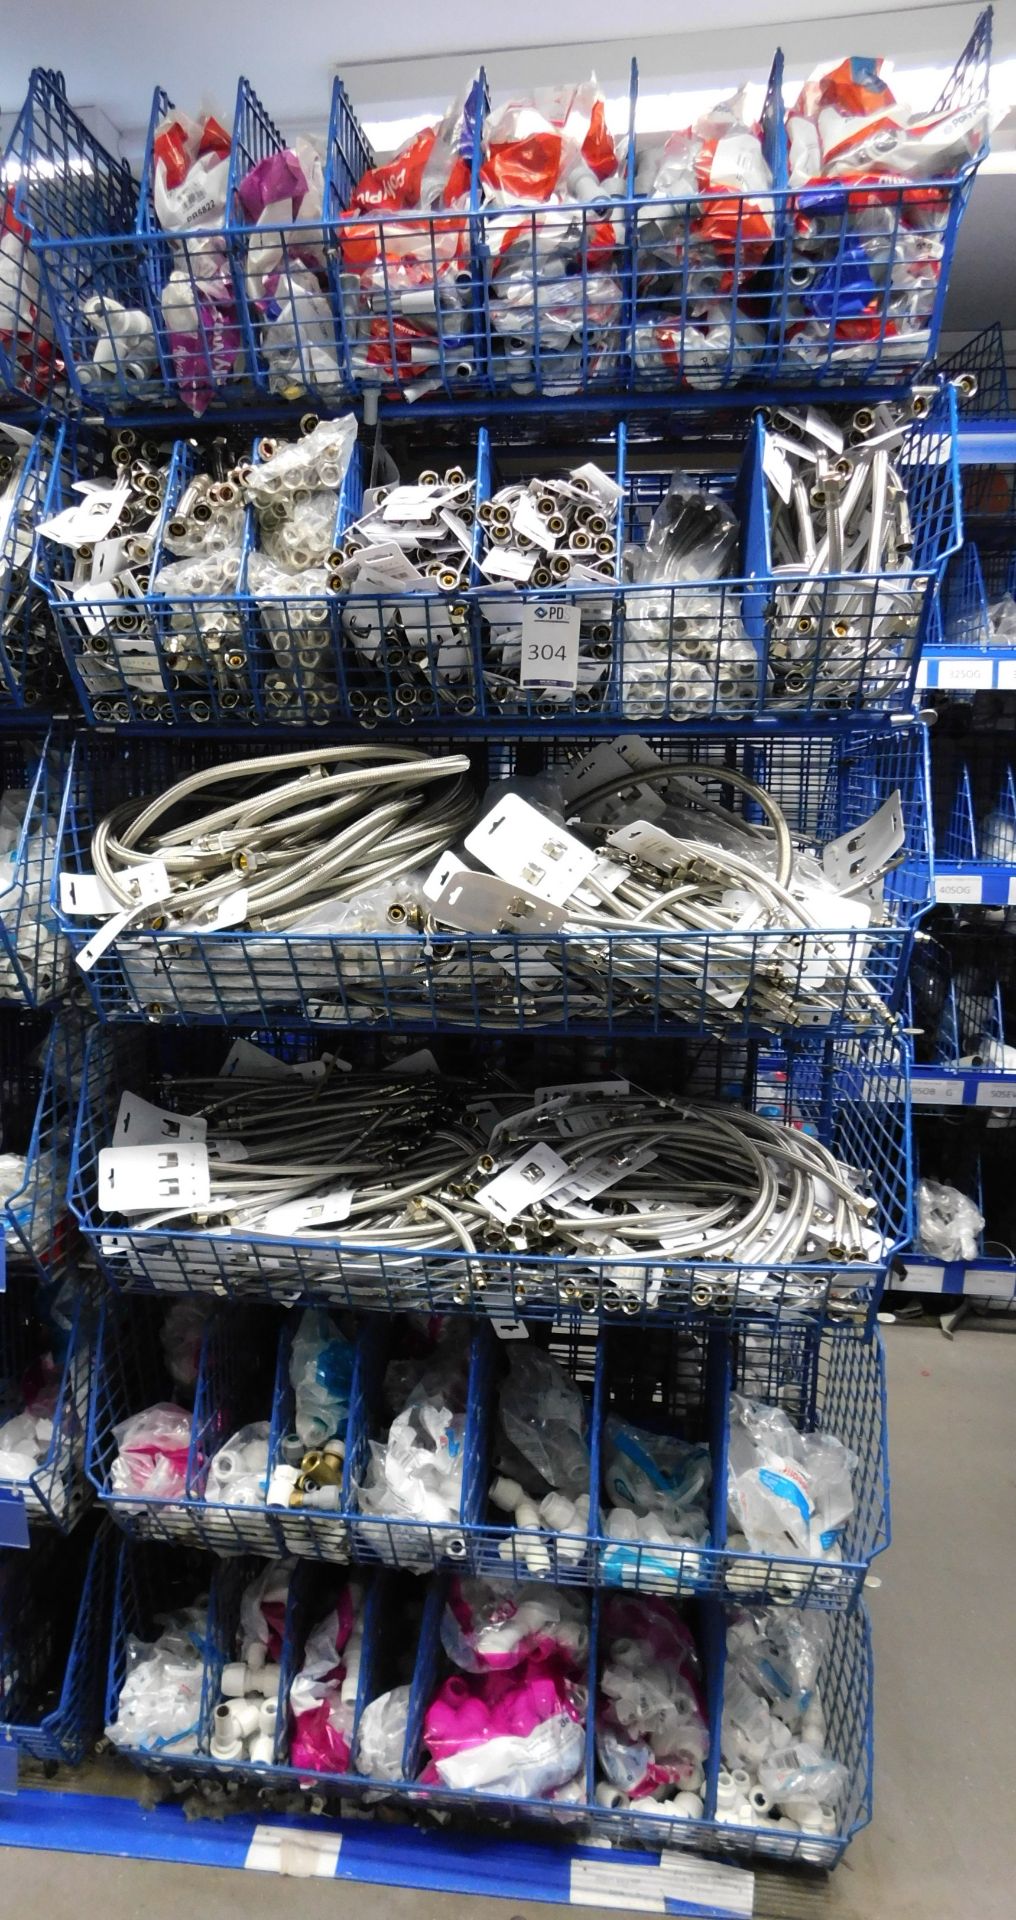 64 Plastic Coated Baskets & Contents of Flexible Connectors etc. (Location Chingford. Please Refer